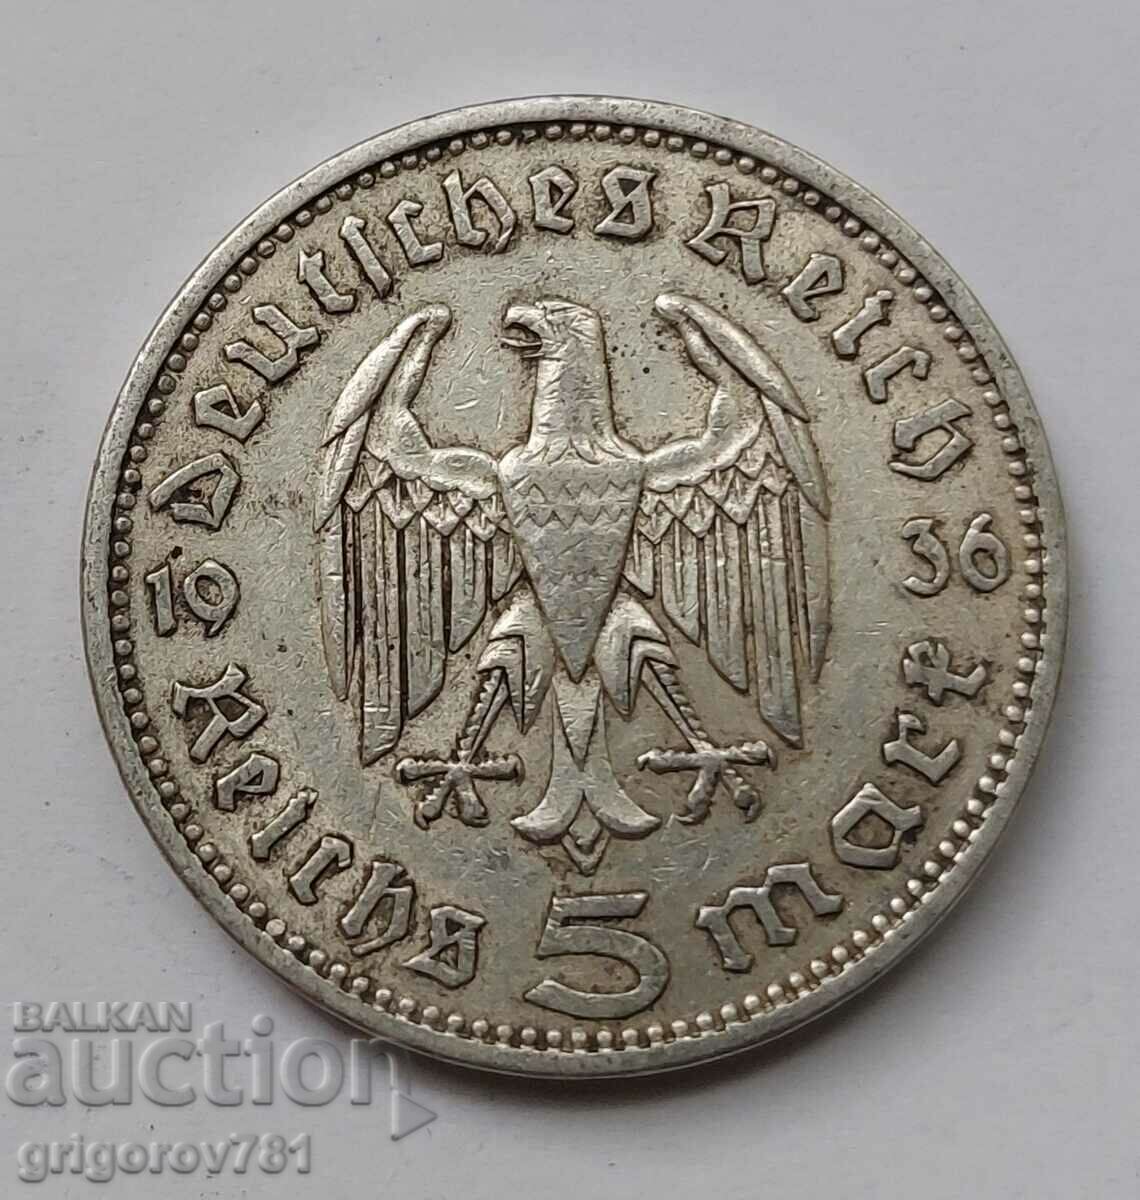 5 Mark Silver Germany 1936 A III Reich Silver Coin #42